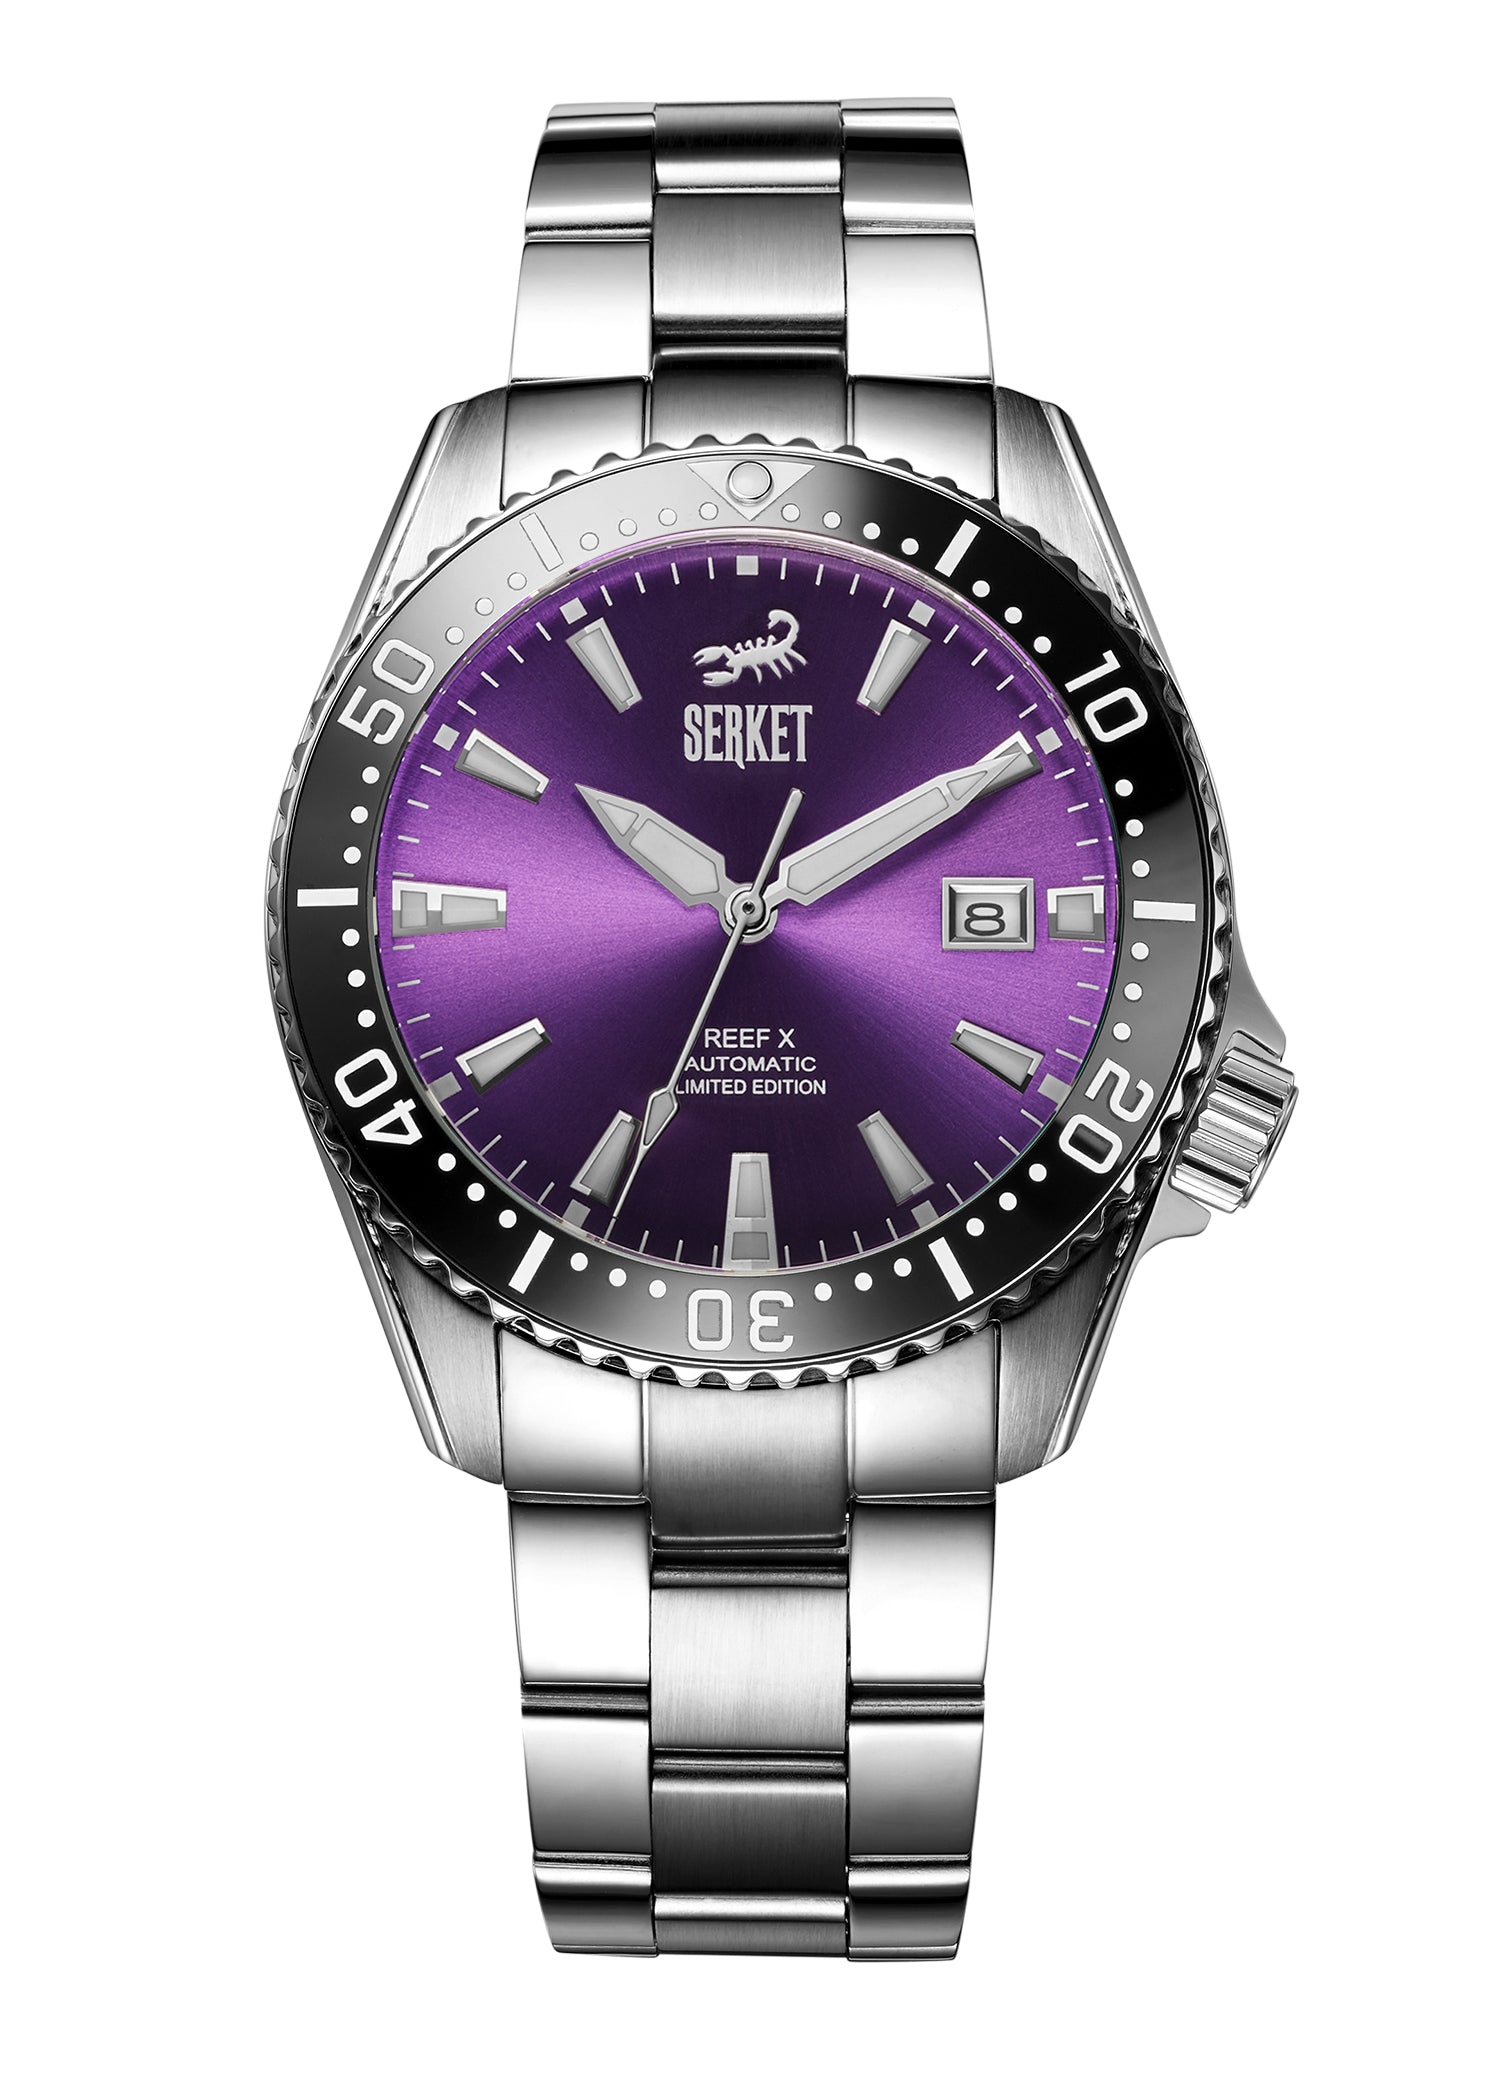 Field Watch Black PVD - Olive Dial Purple Dive